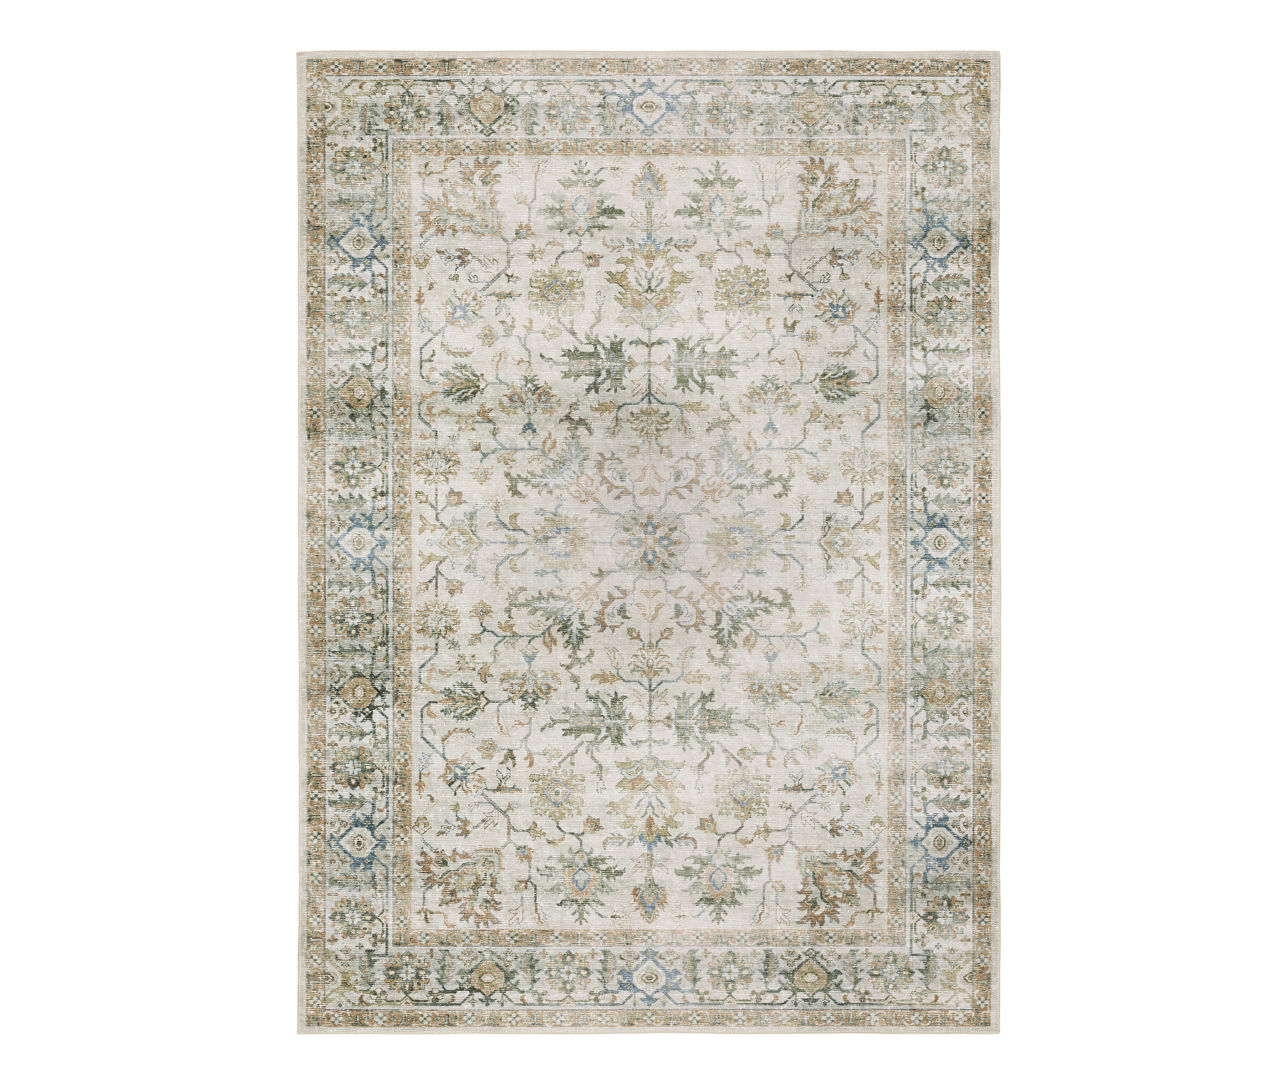 Chalkley Ivory & Green Floral Area Rug, (7.6' x 10')